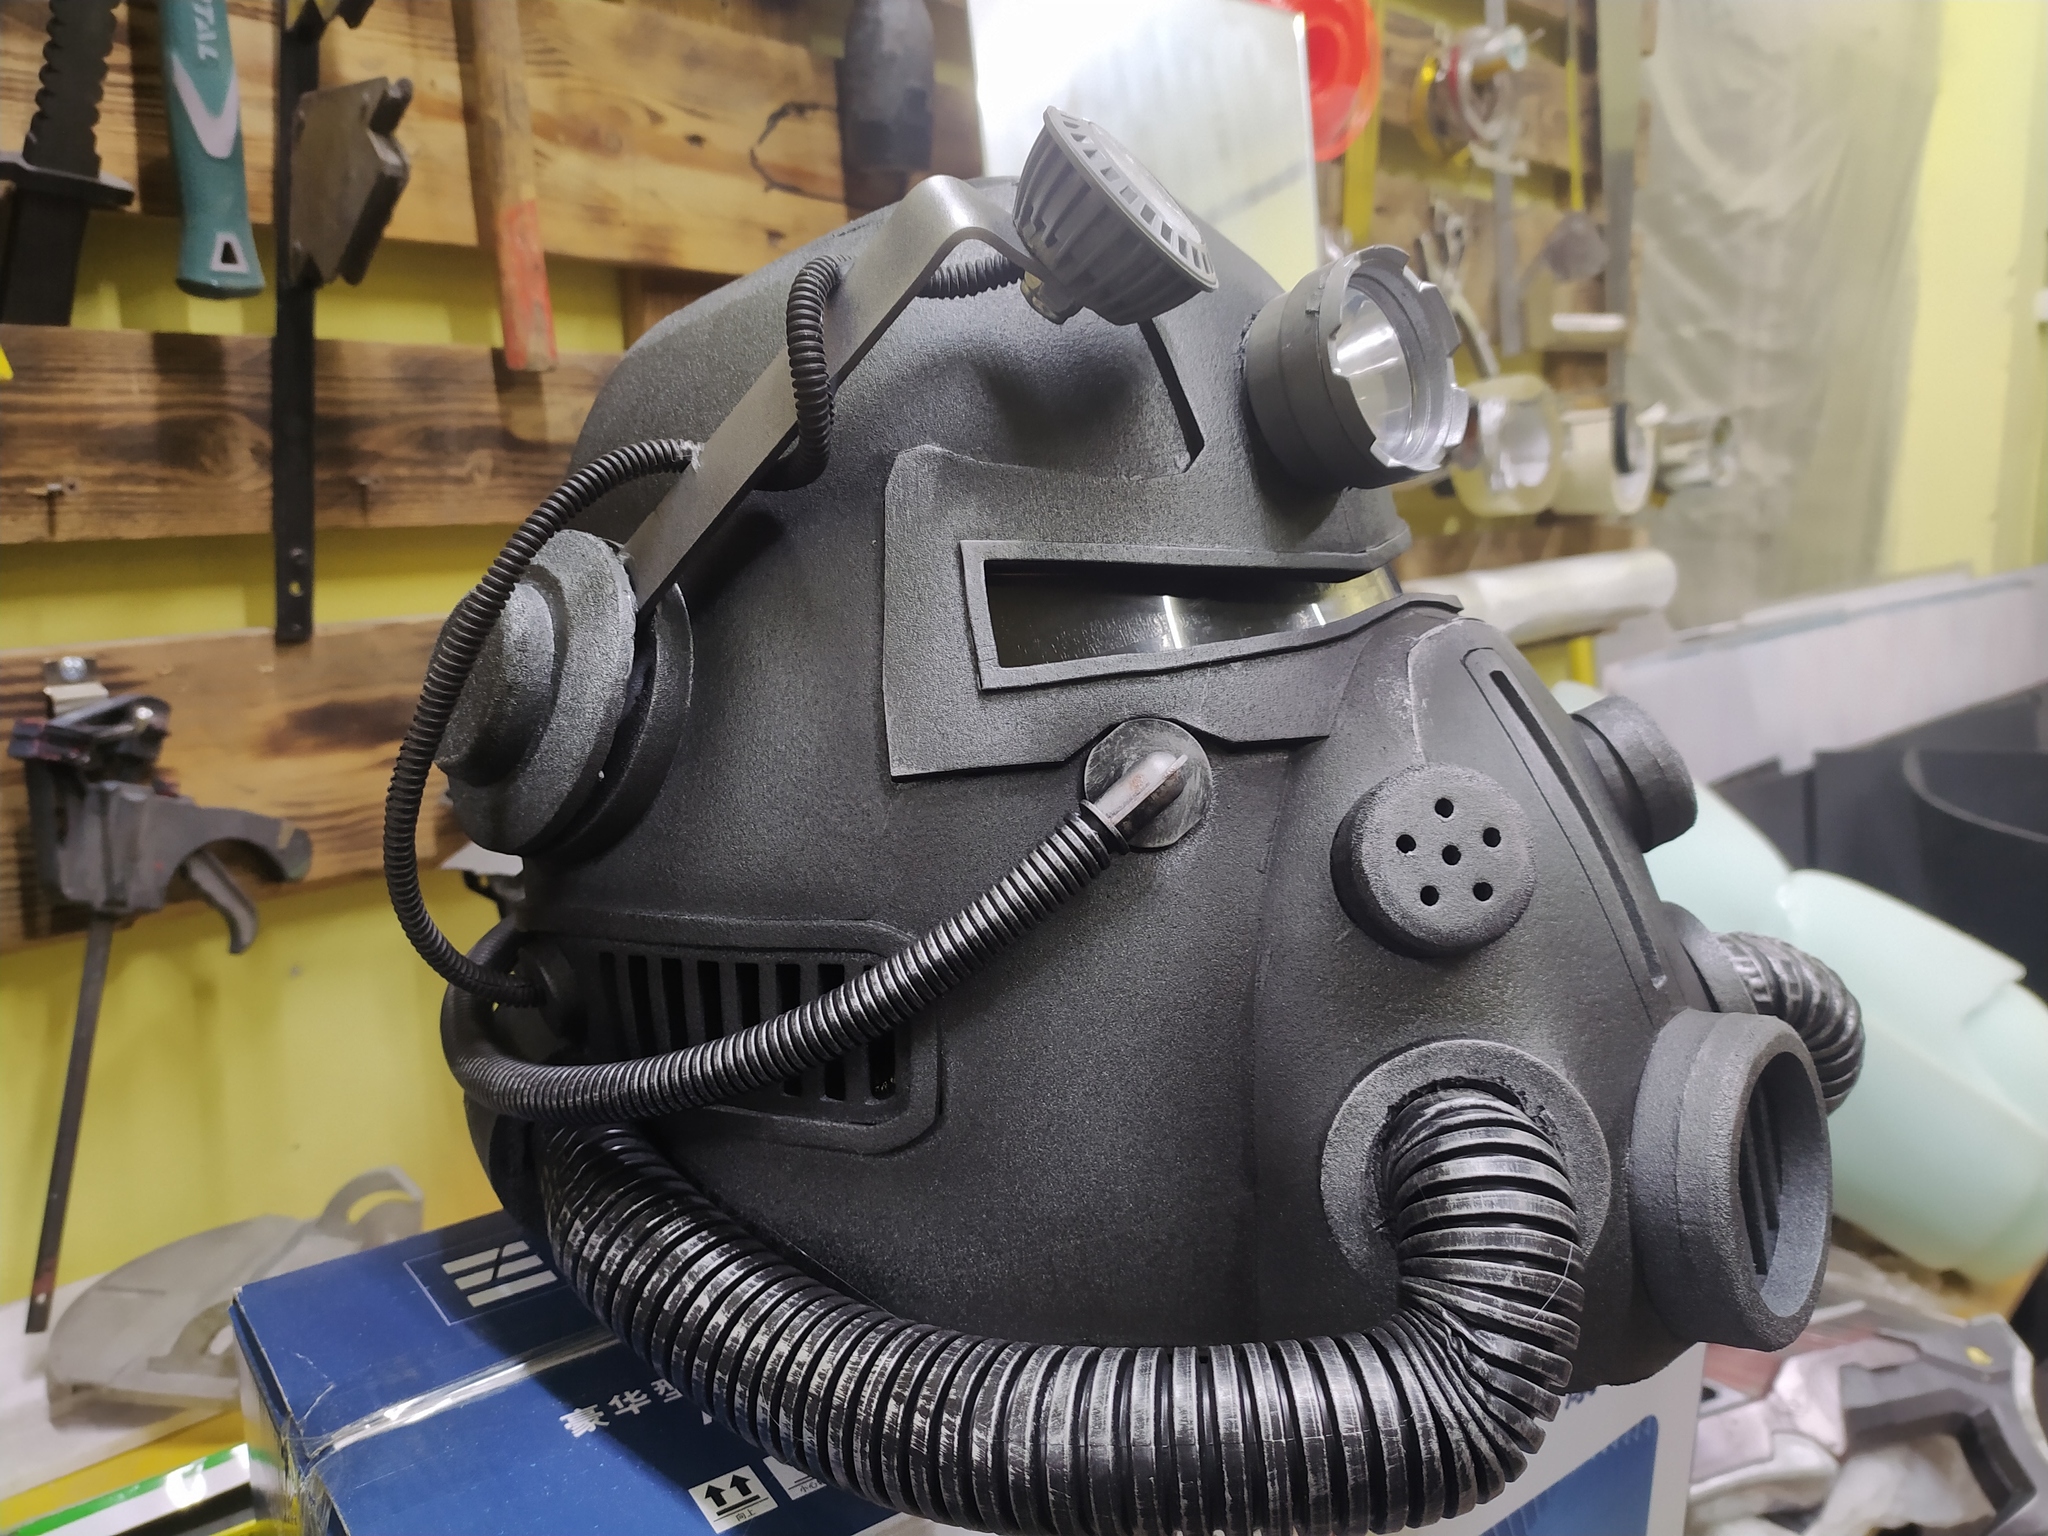 T-51b Power Armor Helmet from Fallout - My, Cosplay, Fallout, With your own hands, Needlework without process, Computer games, Longpost